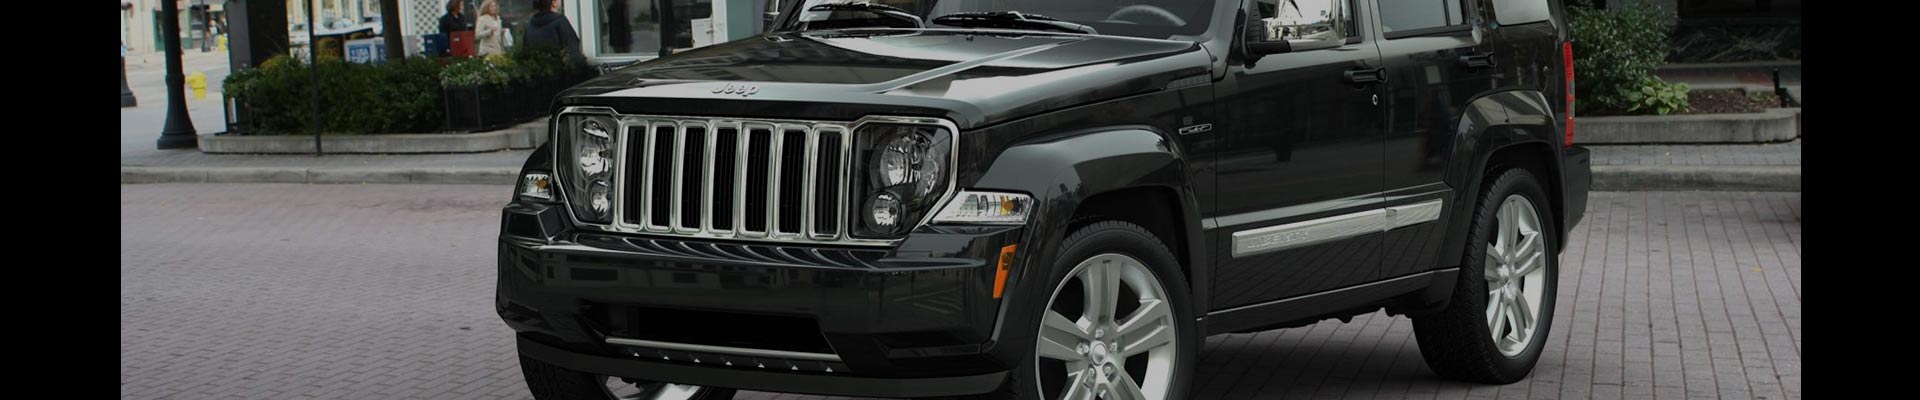 Shop Replacement and OEM 2010 Jeep Liberty Parts with Discounted Price on the Net